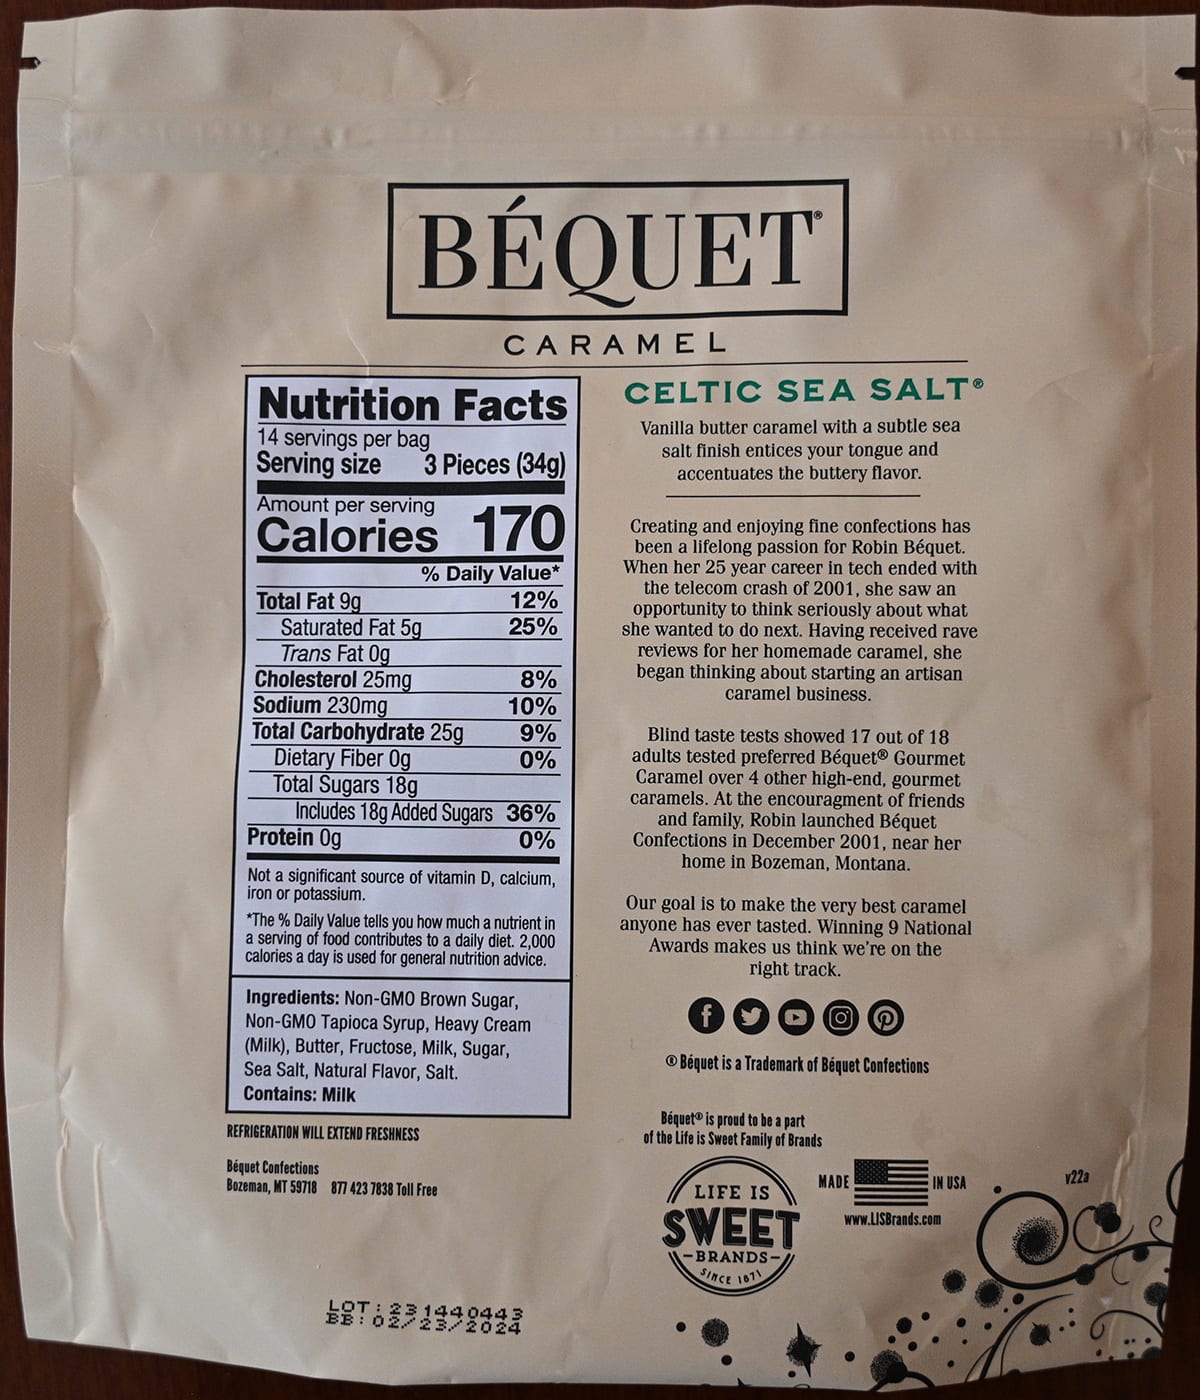 Image of the back of the bag of caramels showing the company description, calories and ingredients.